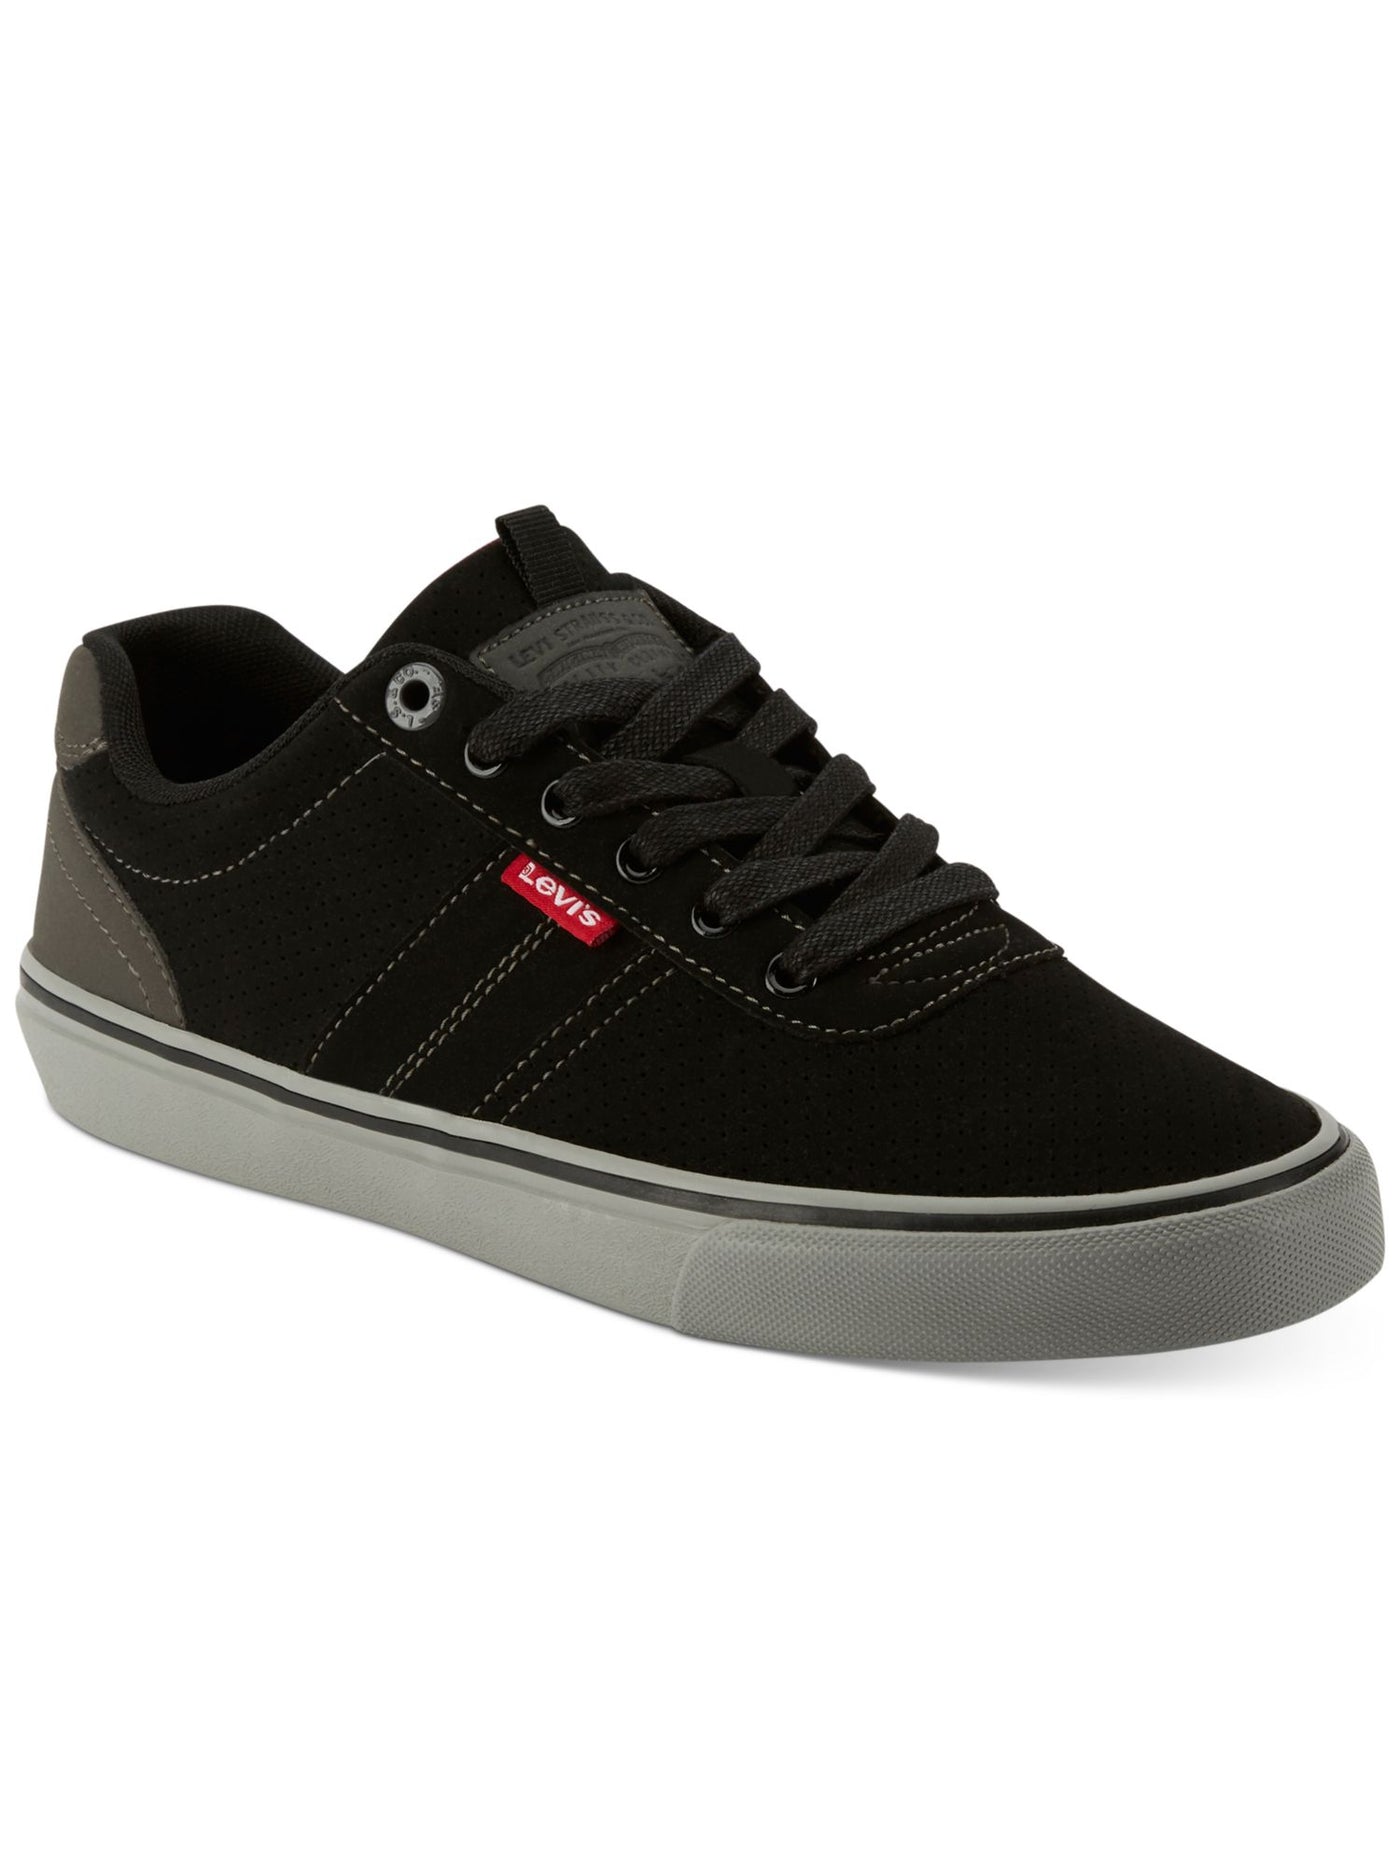 LEVI'S Mens Black Perforated Cushioned Miles Round Toe Lace-Up Sneakers Shoes 9.5